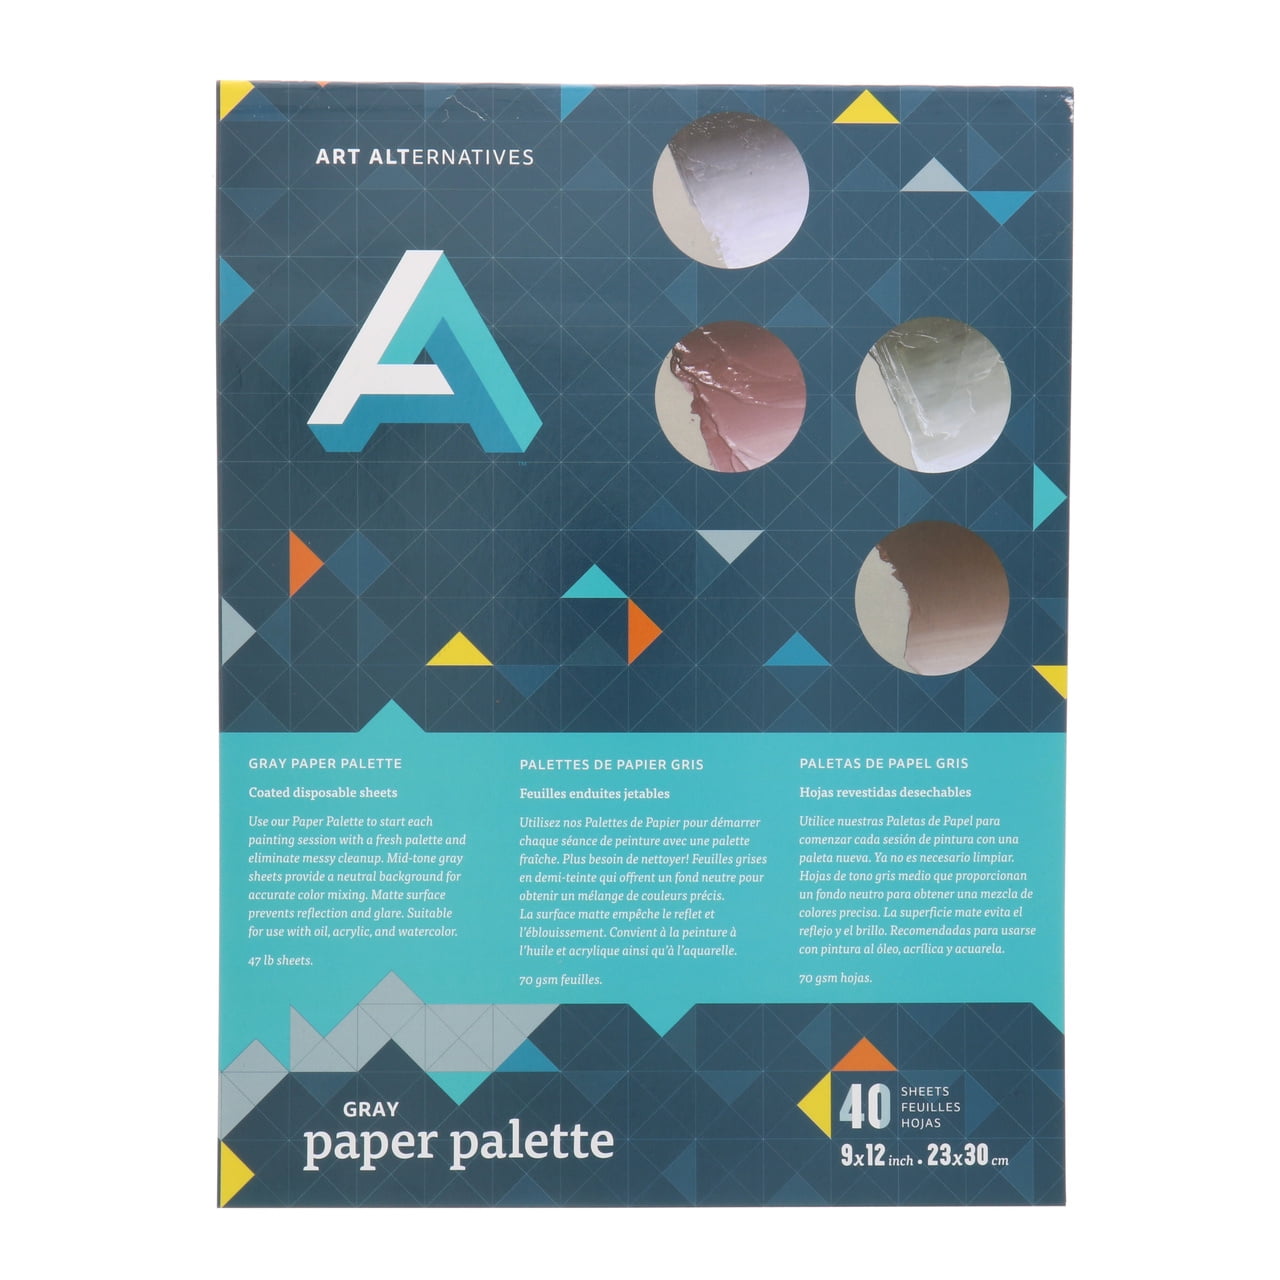 Blick Palette Paper Pad - 9 inch x 12 inch, 50 Sheets